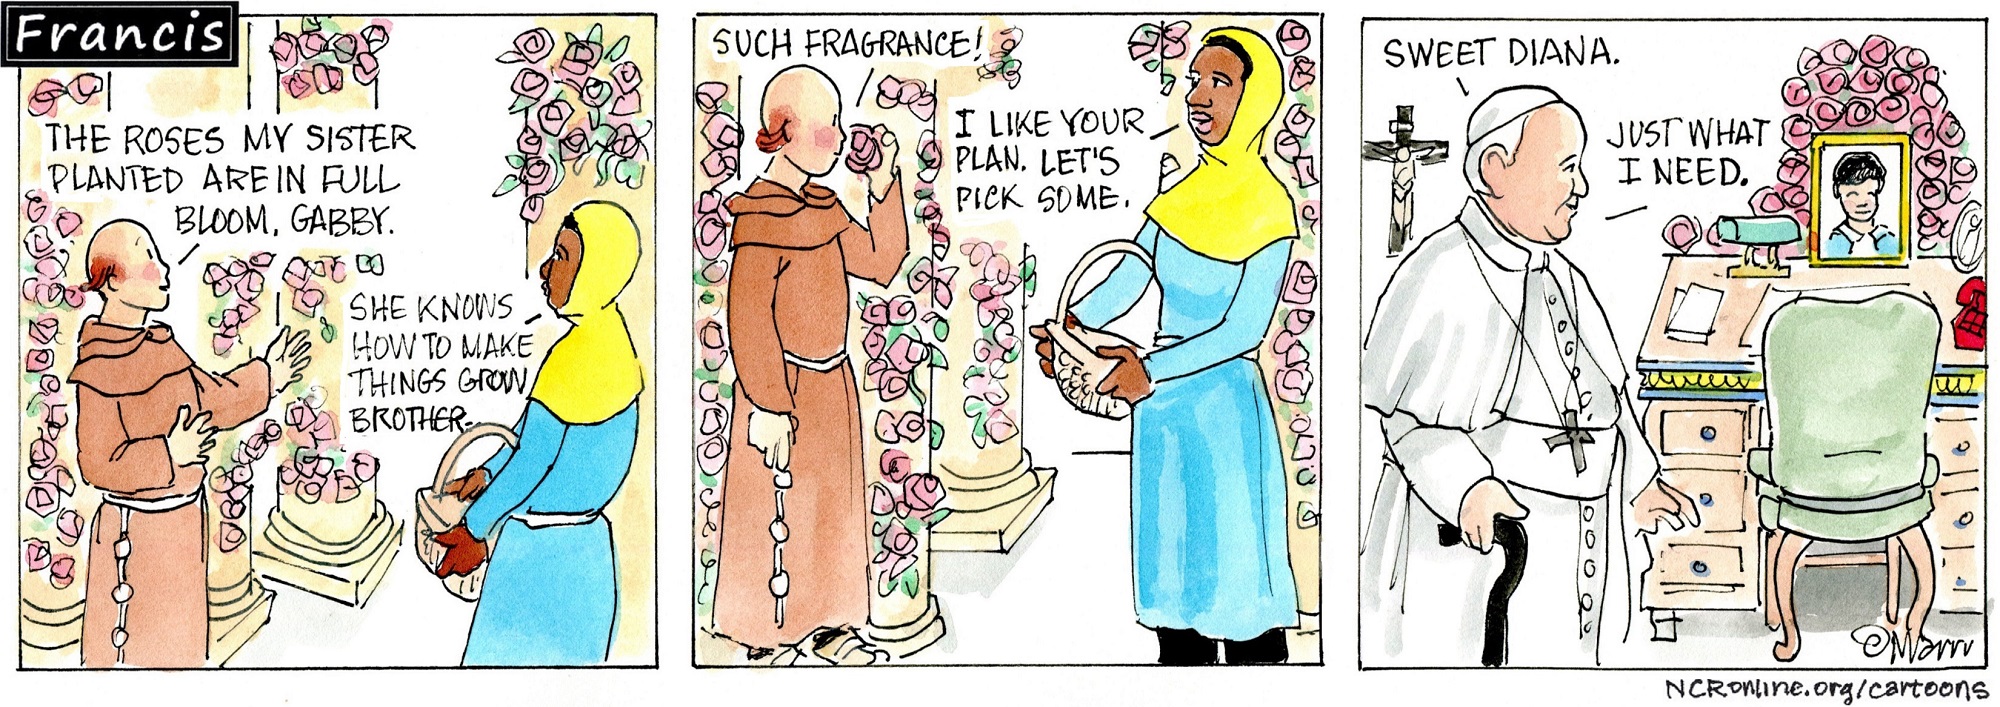 Francis, the comic strip: Brother Leo picks some roses for Francis